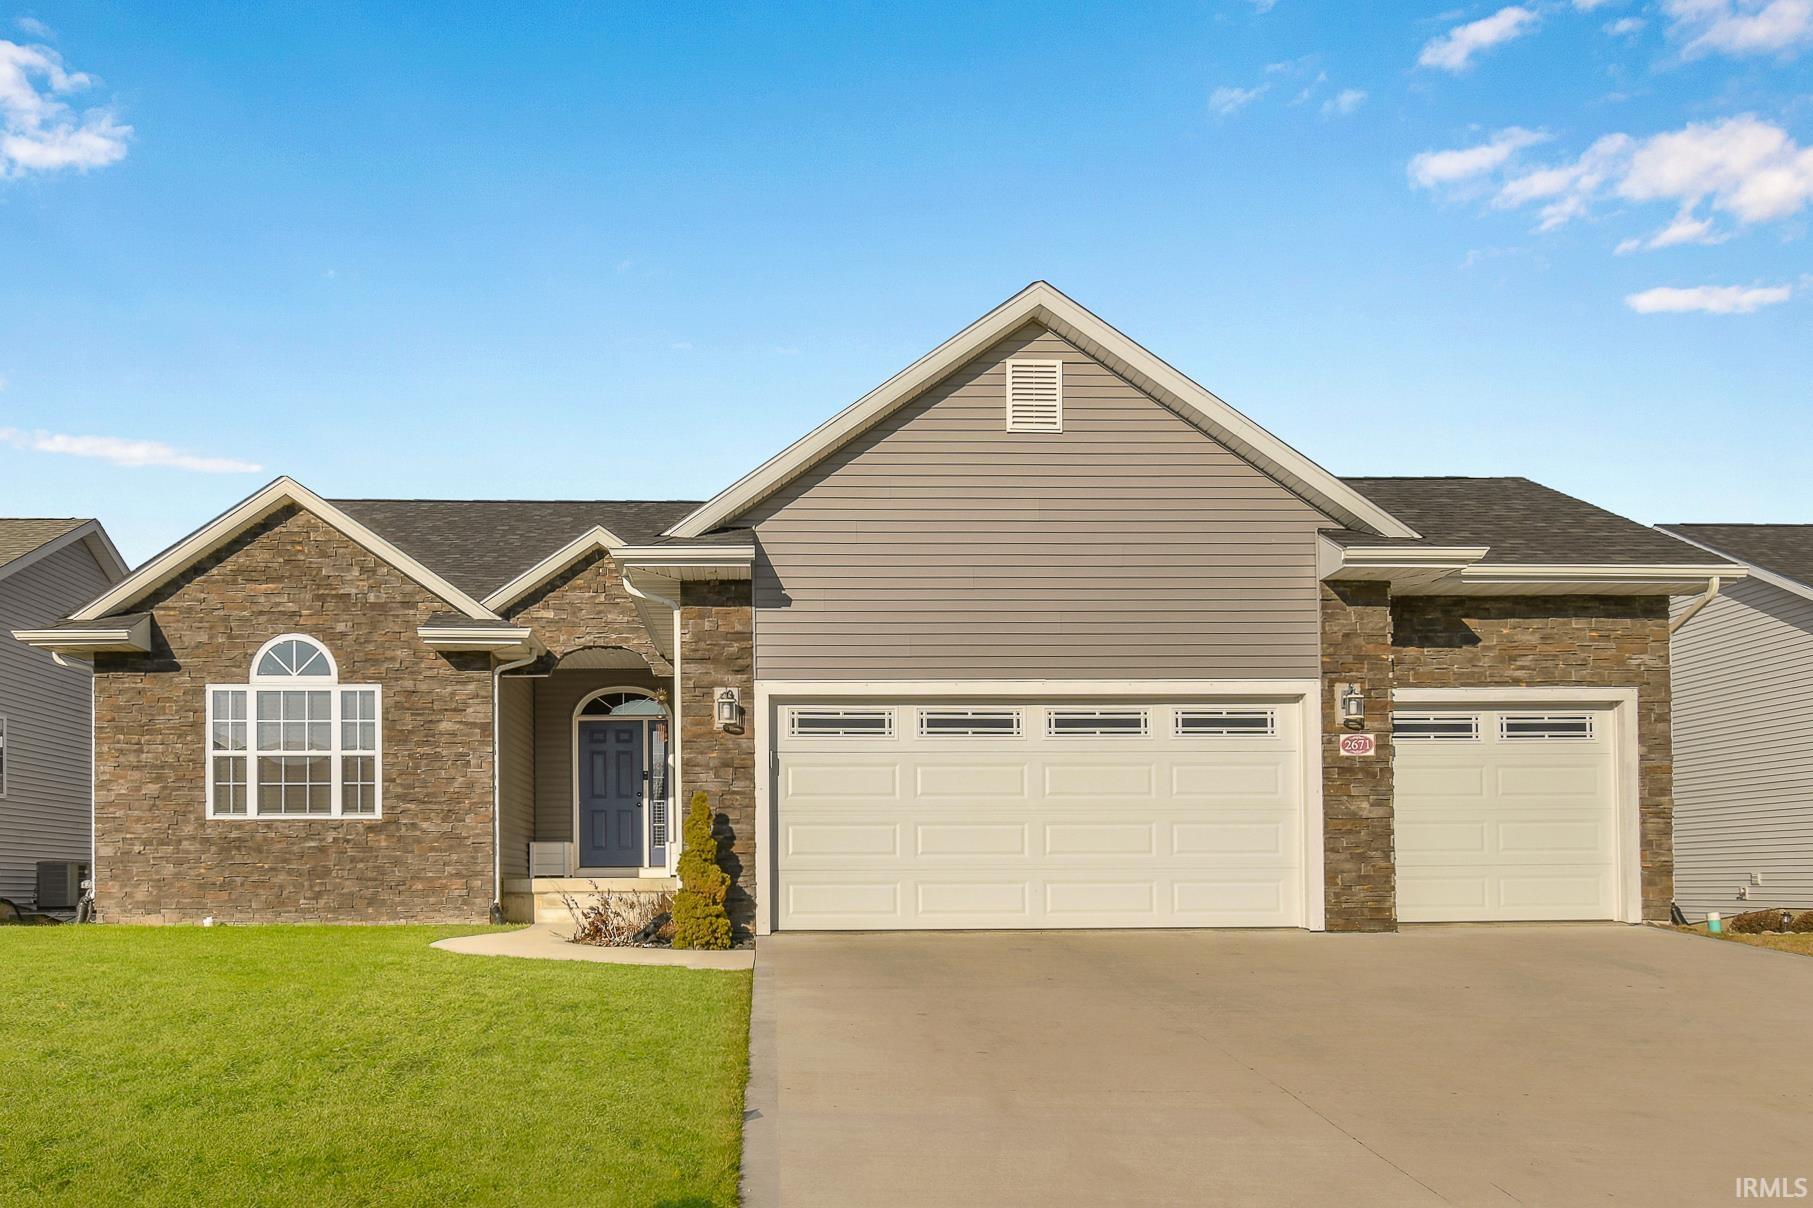 2671 Pine Cone Lane, Warsaw, IN 46582